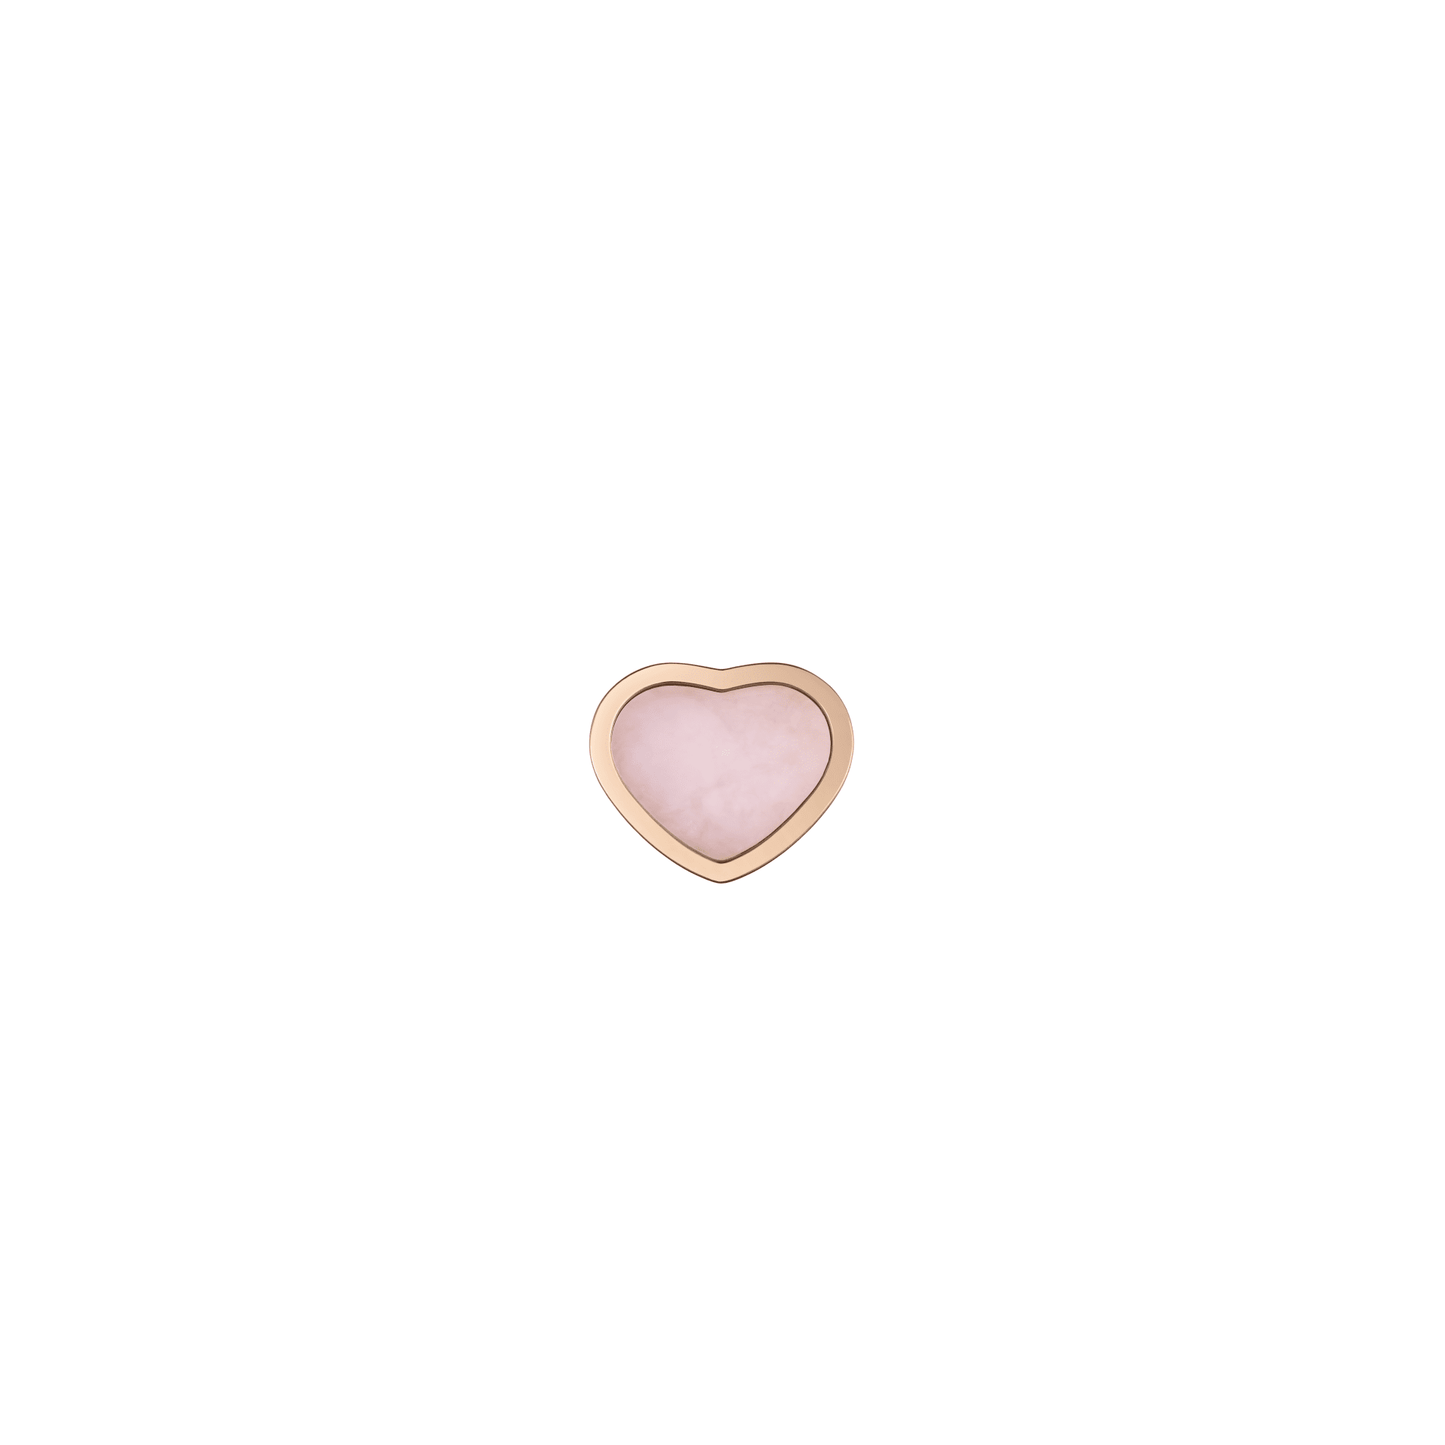 MY HAPPY HEARTS SINGLE EARRING, ETHICAL ROSE GOLD, PINK O 83A086-5622